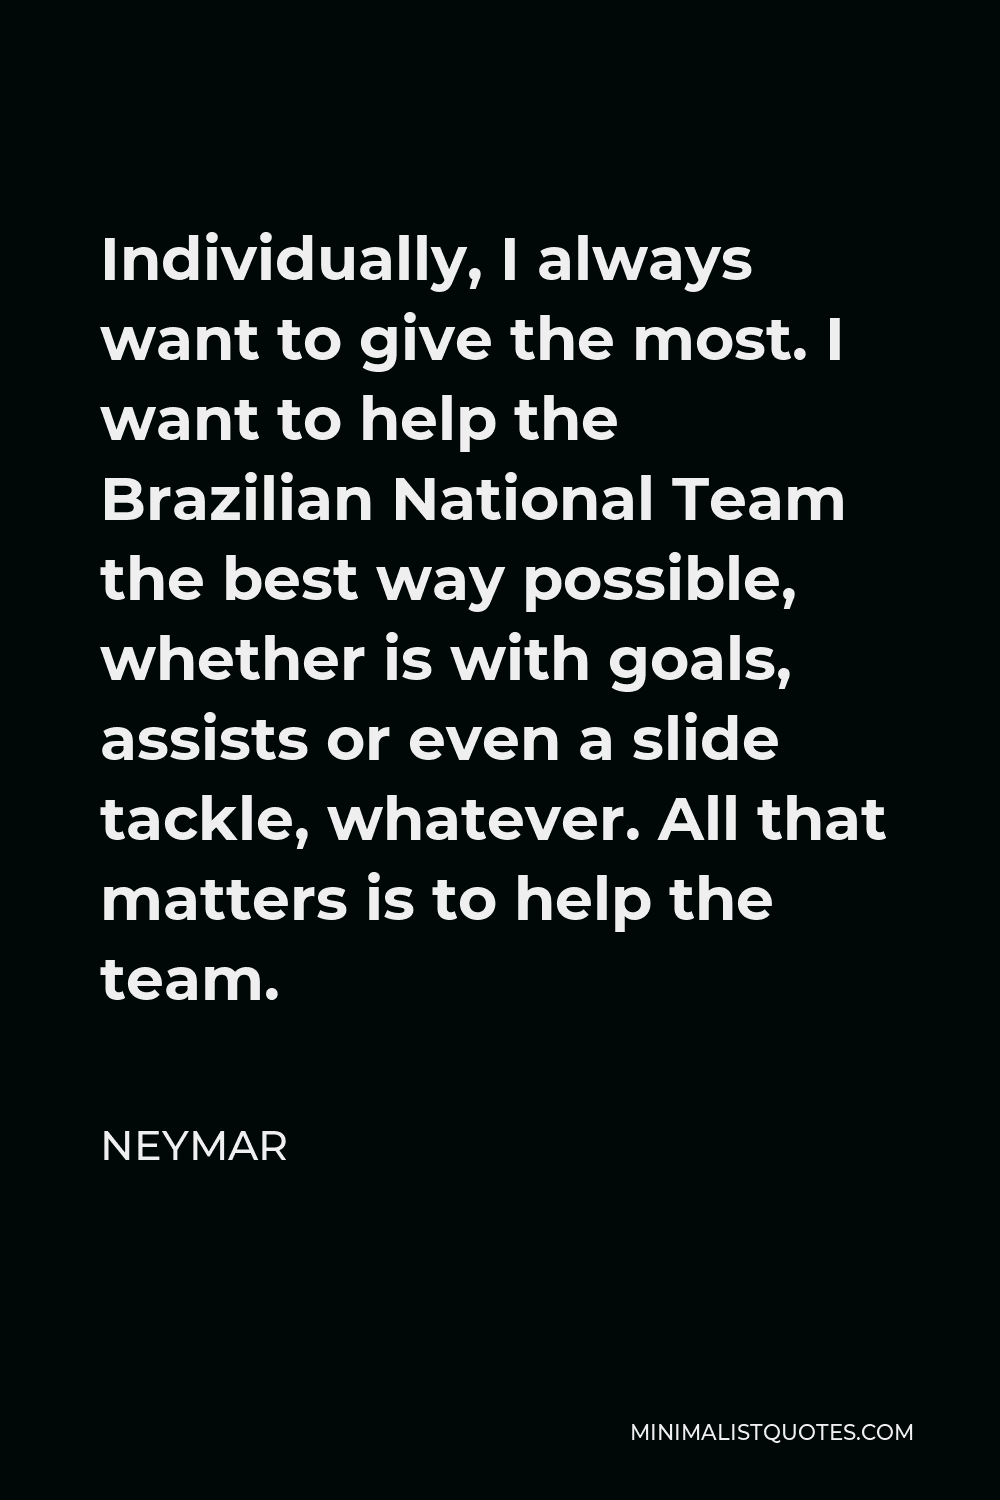 Neymar Quote - Individually, I always want to give the most. I want to help the Brazilian National Team the best way possible, whether is with goals, assists or even a slide tackle, whatever. All that matters is to help the team.